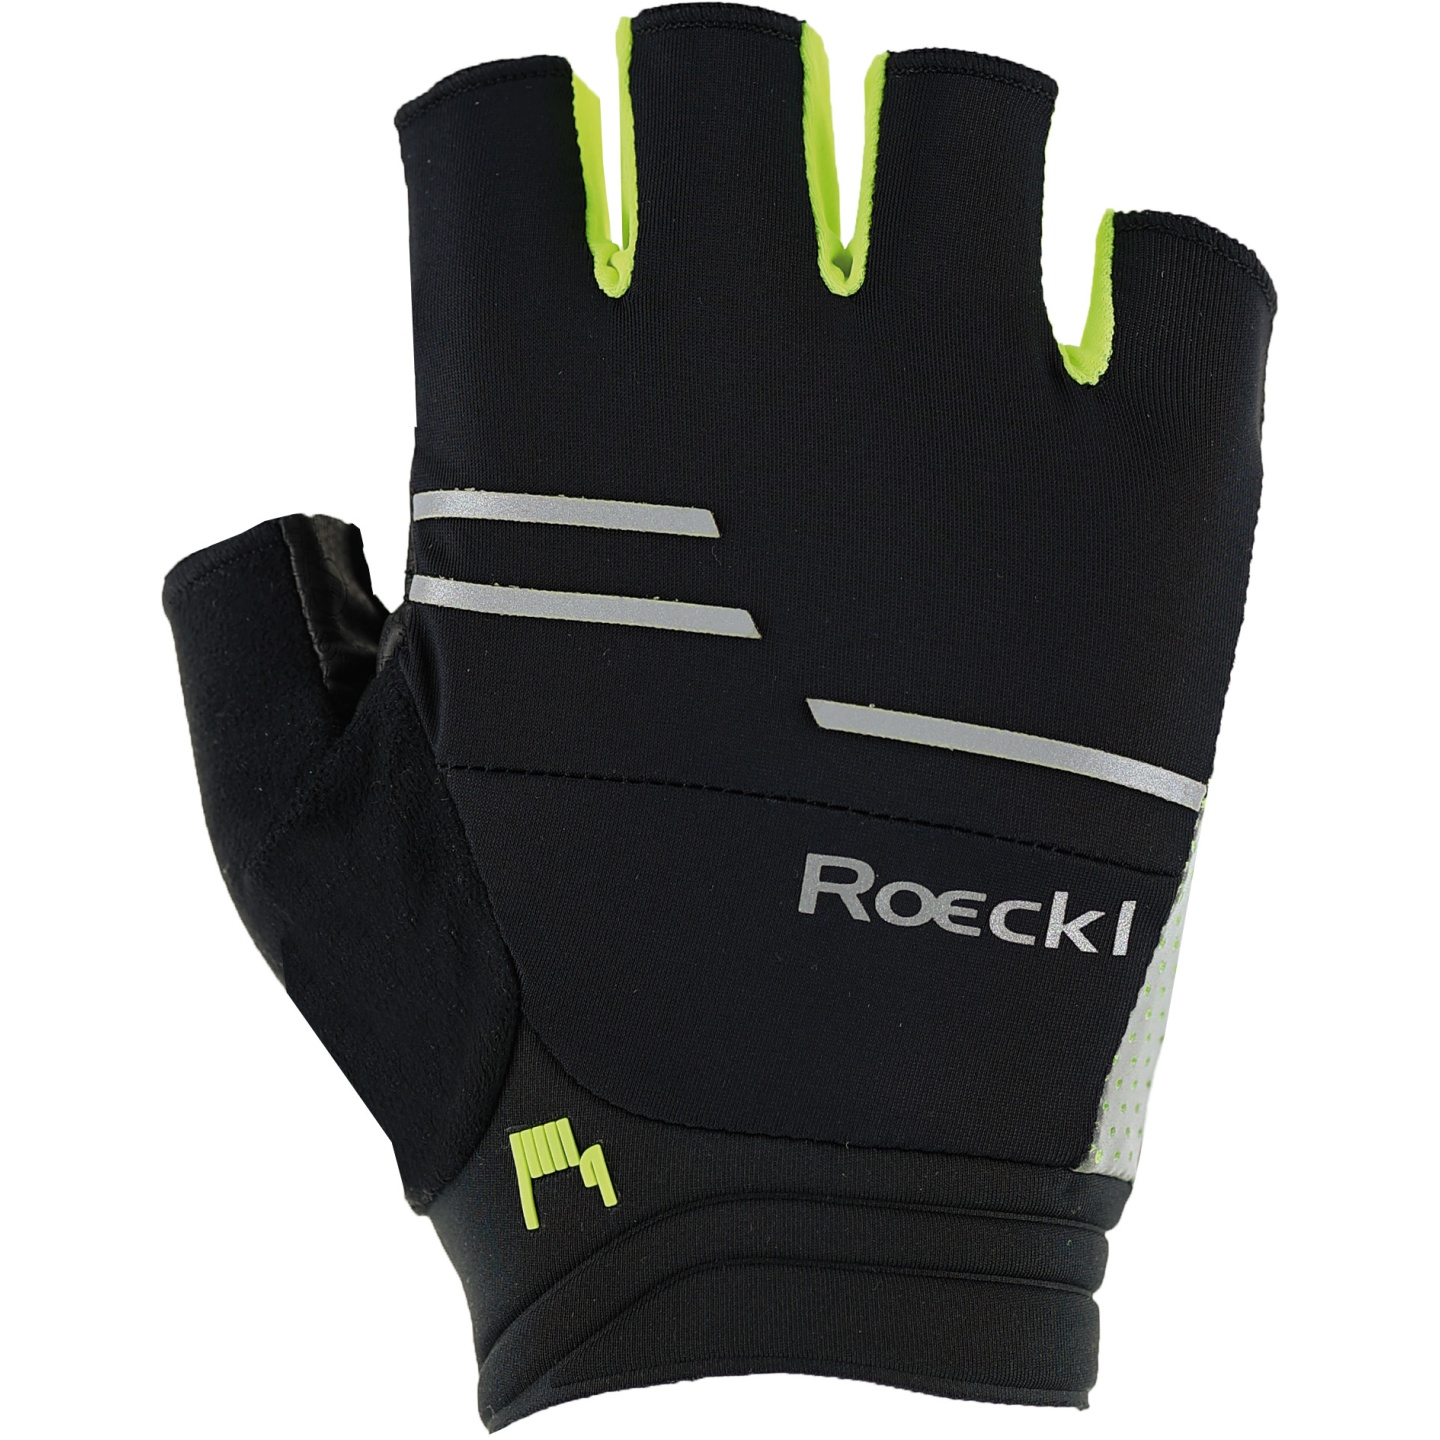 Image of Roeckl Sports Iguna Cycling Gloves - black/fluo yellow 9210